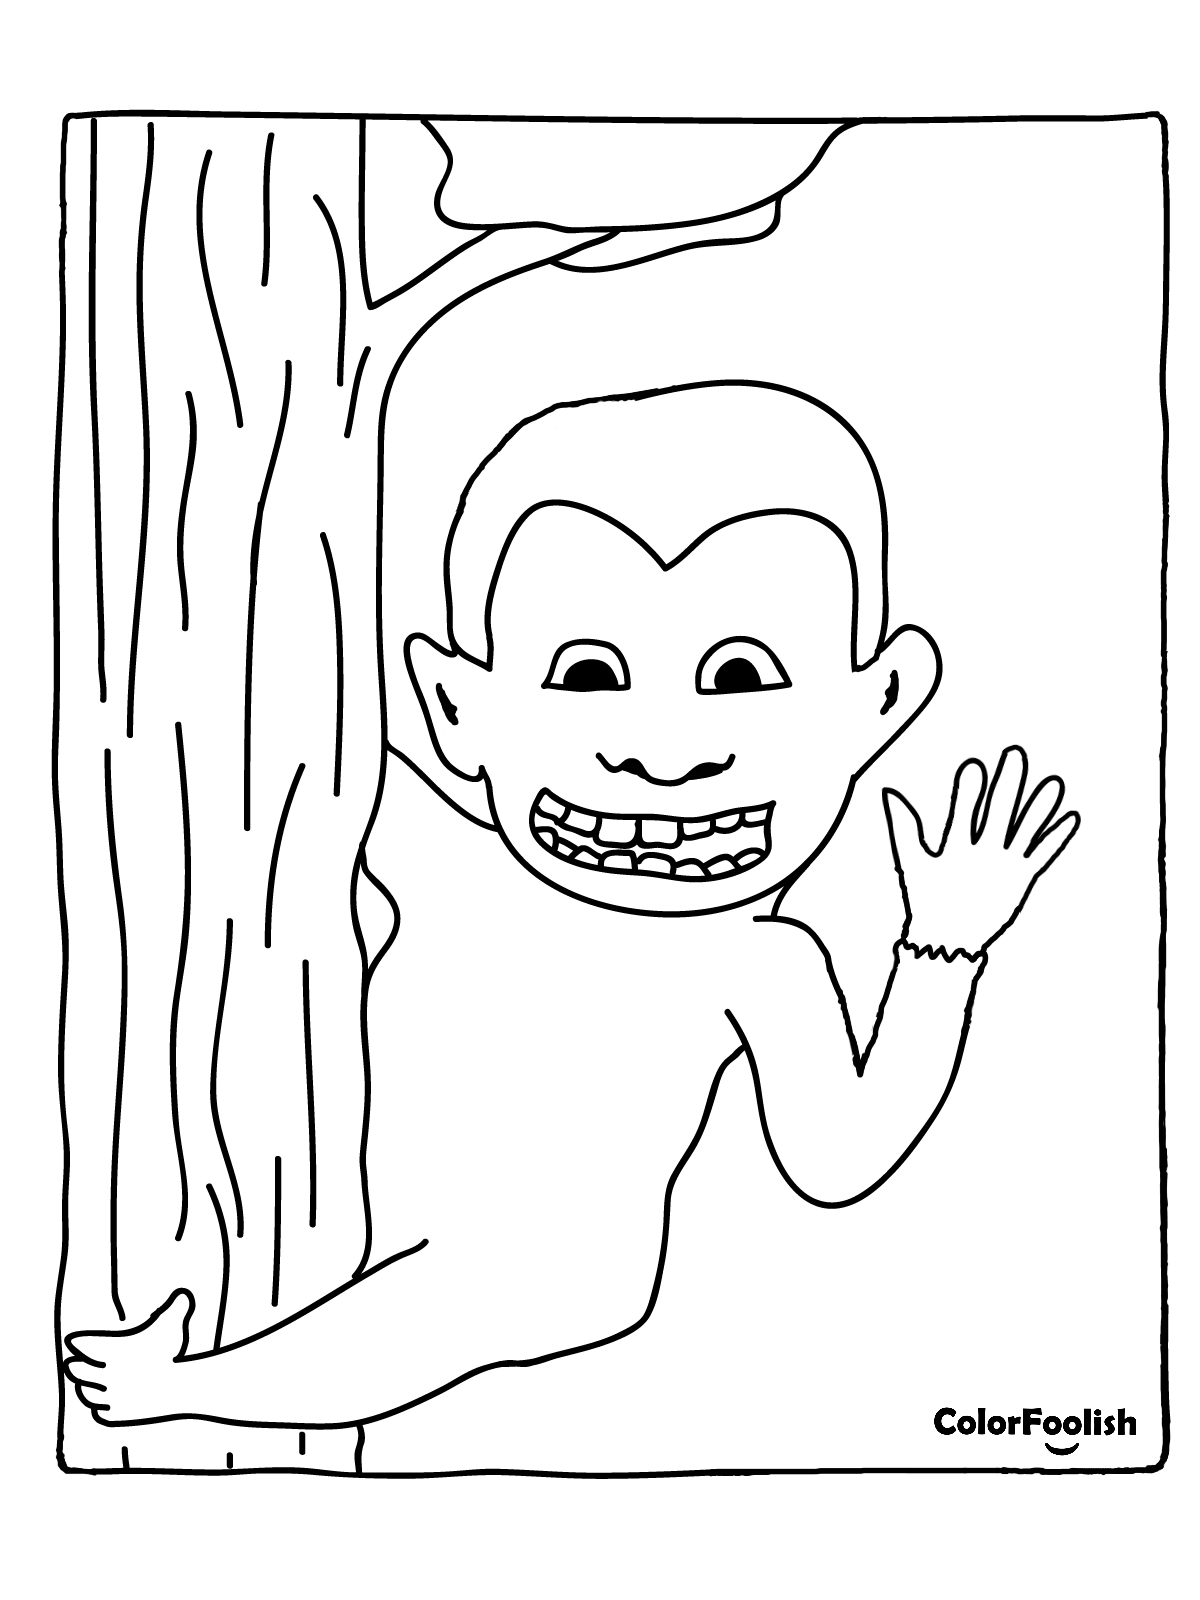 Coloring page of a monkey in a tree